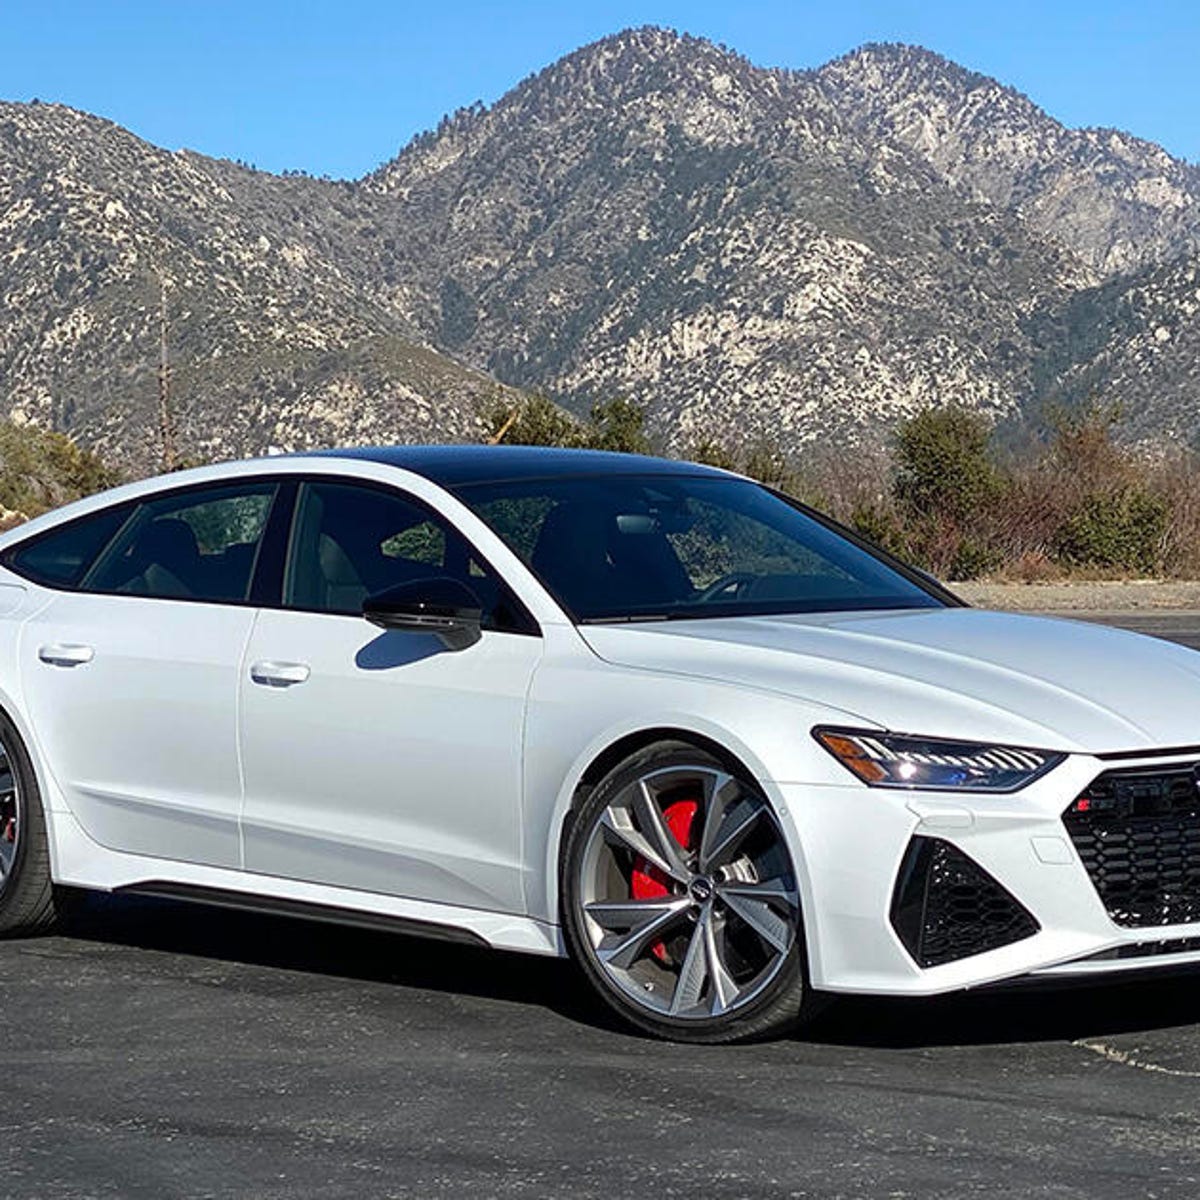 2021 Audi RS7 review: What's not to like? - CNET